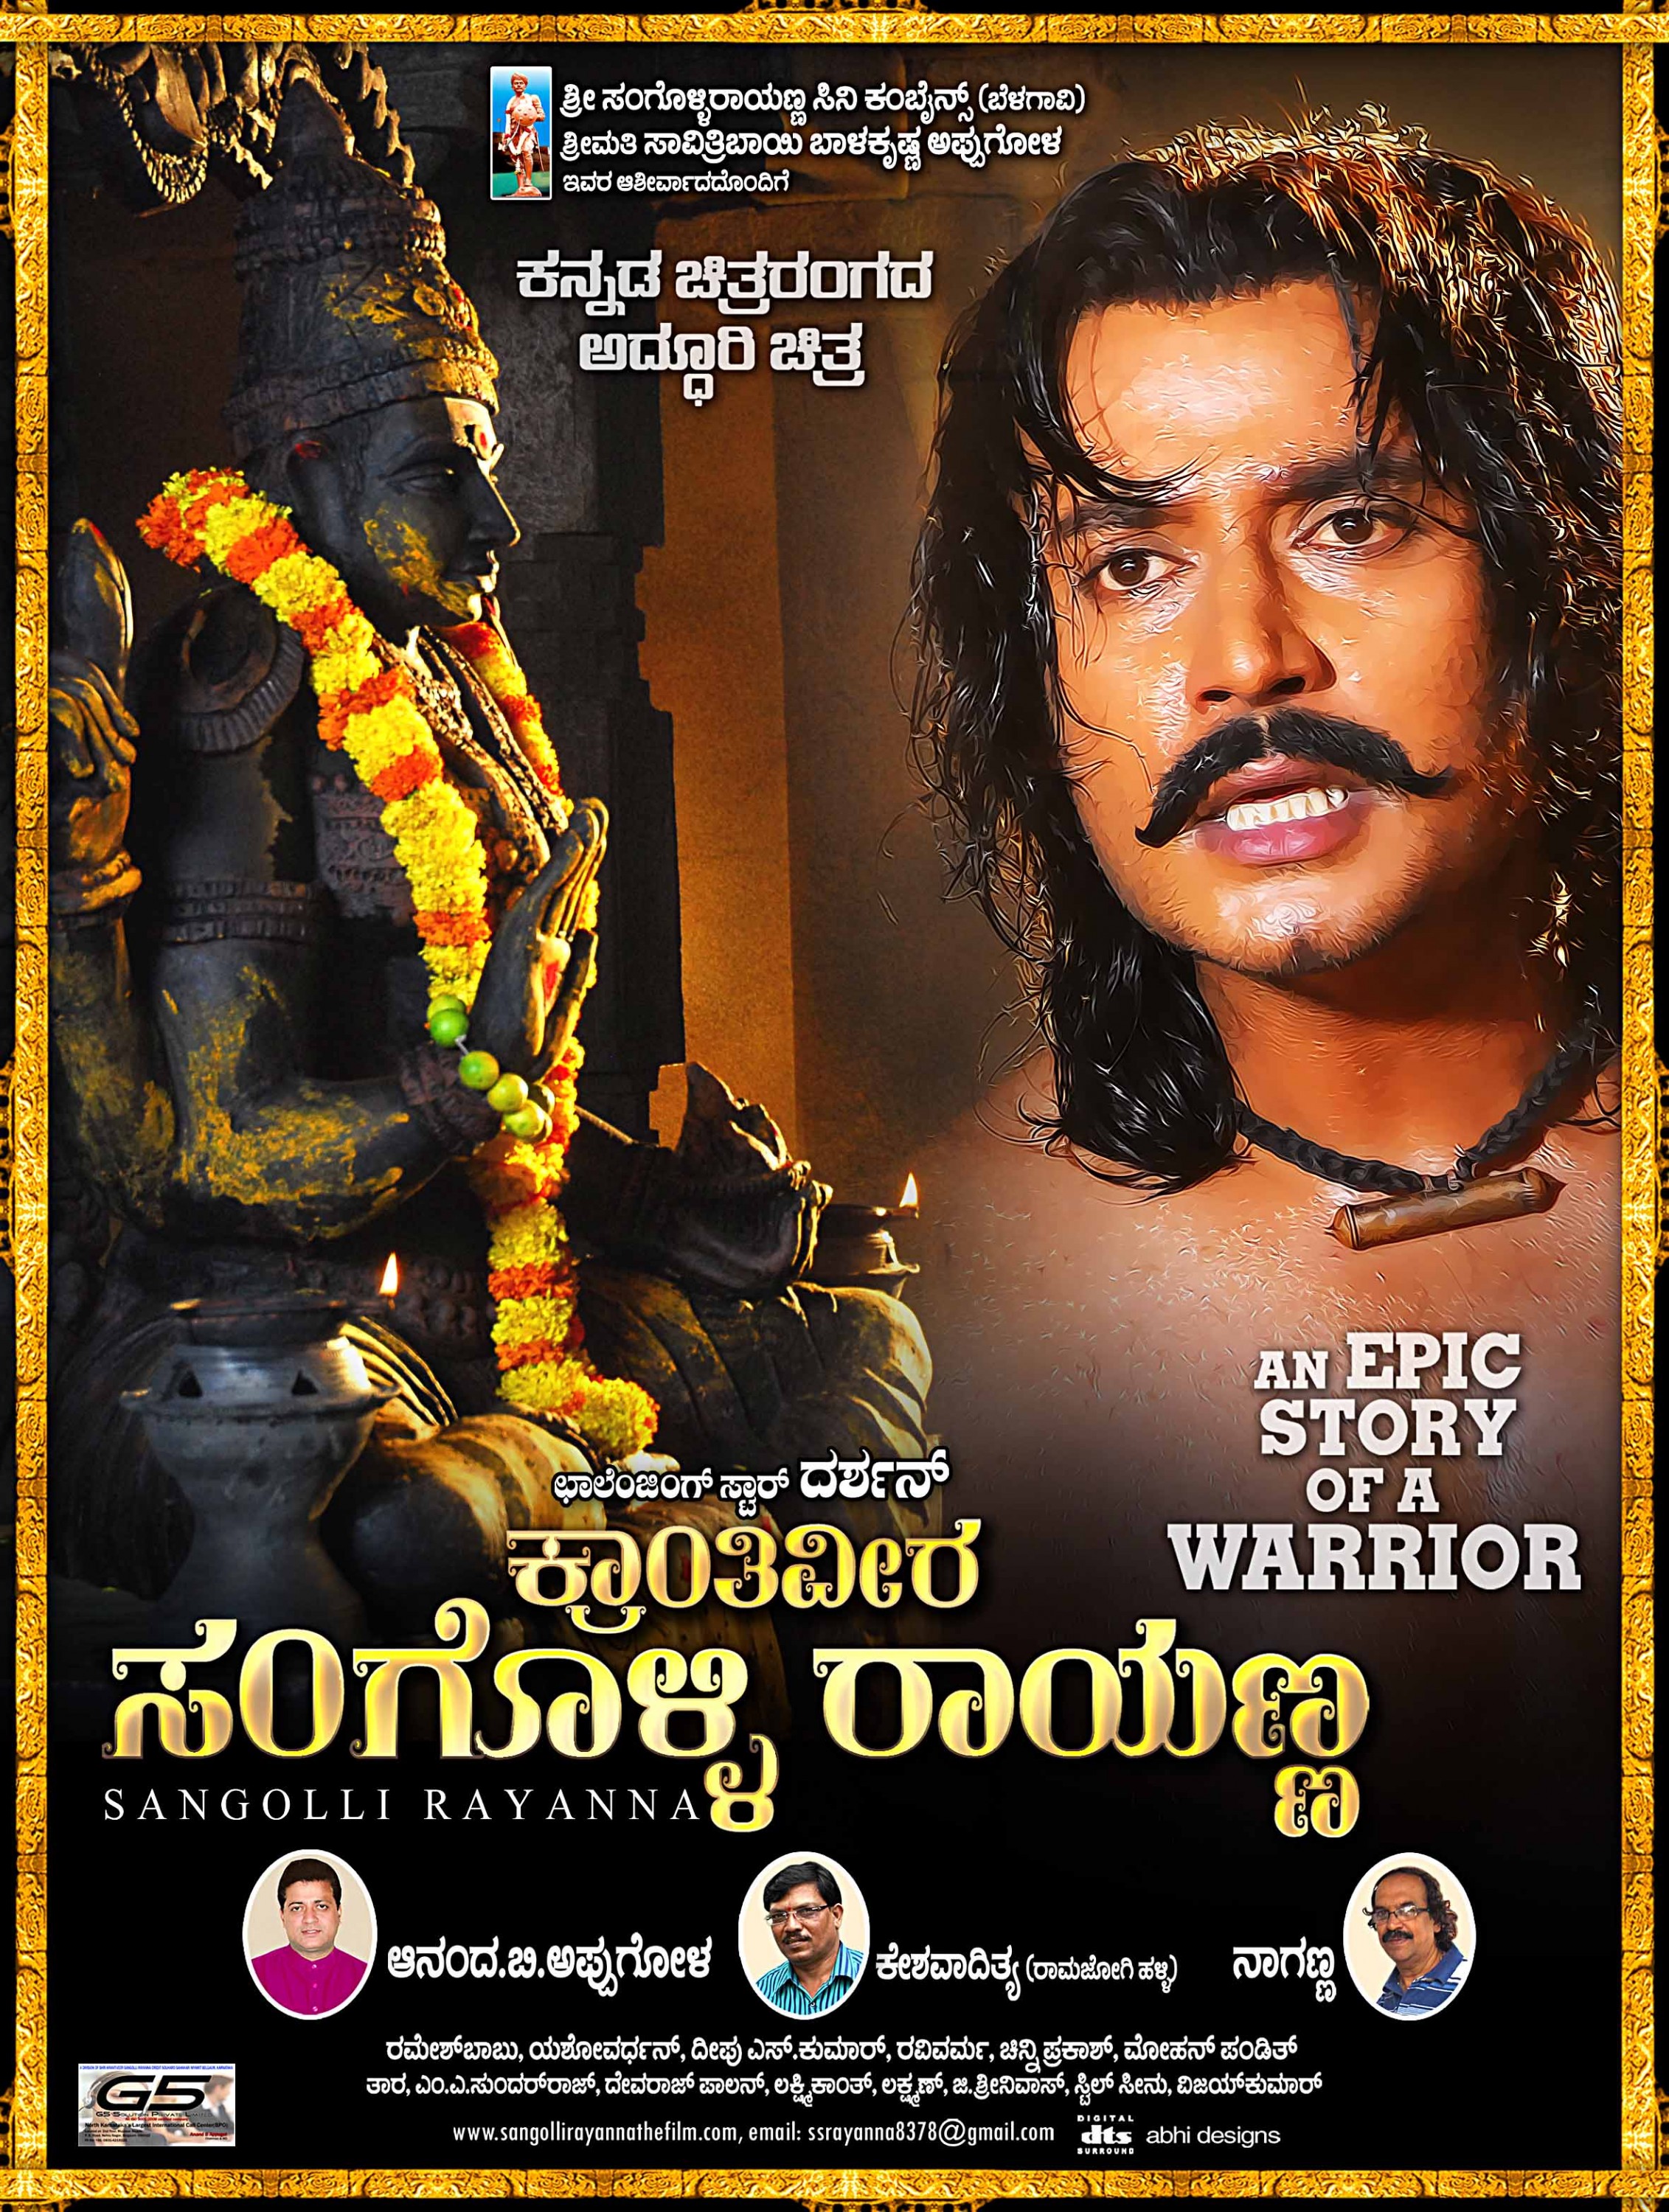 Mega Sized Movie Poster Image for Sangolli Rayanna (#19 of 79)